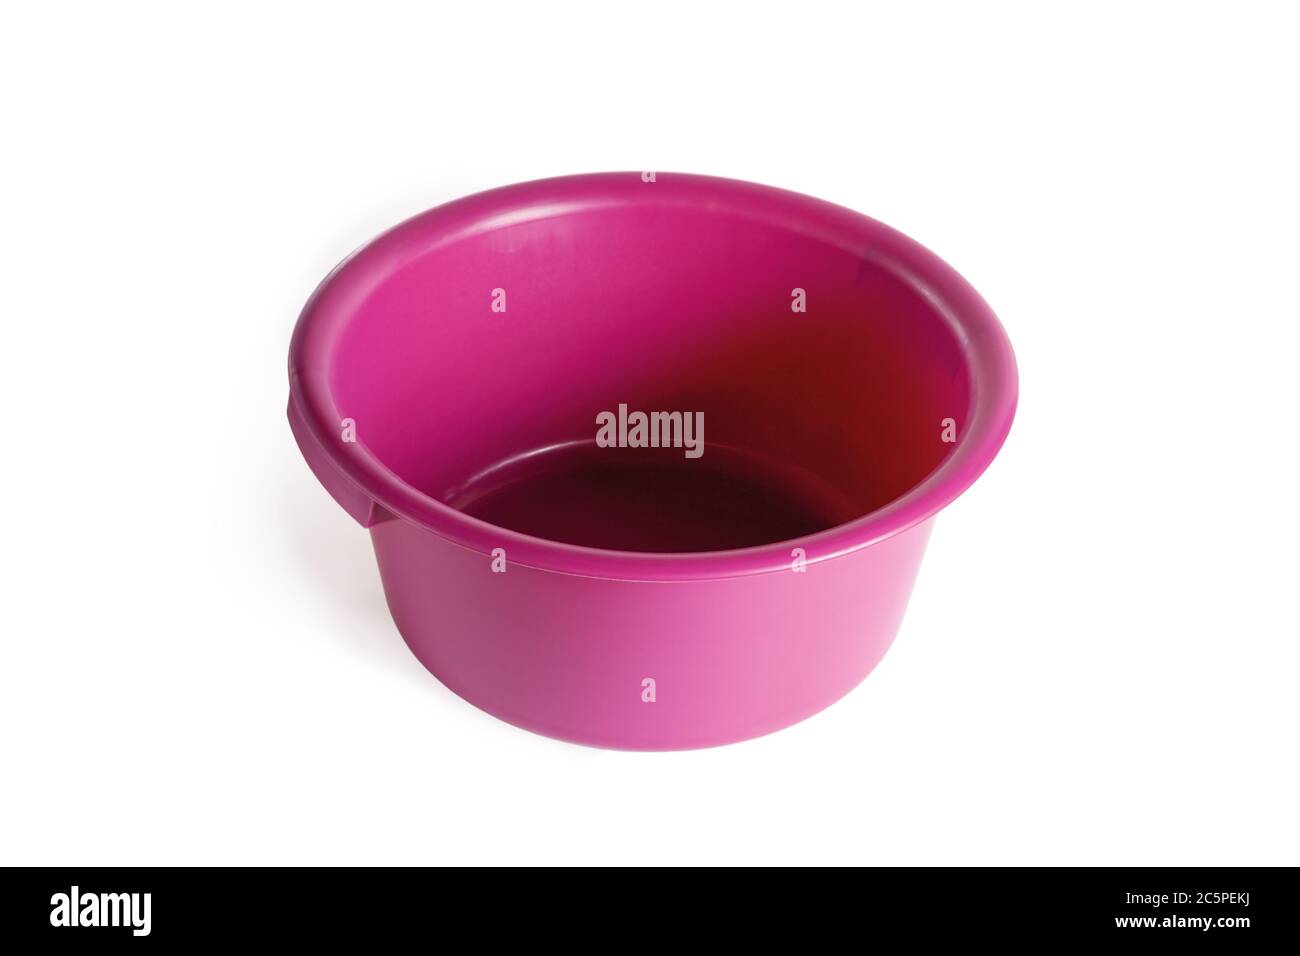 Plastic pink basin. Close-up. Isolated over white background. Stock Photo